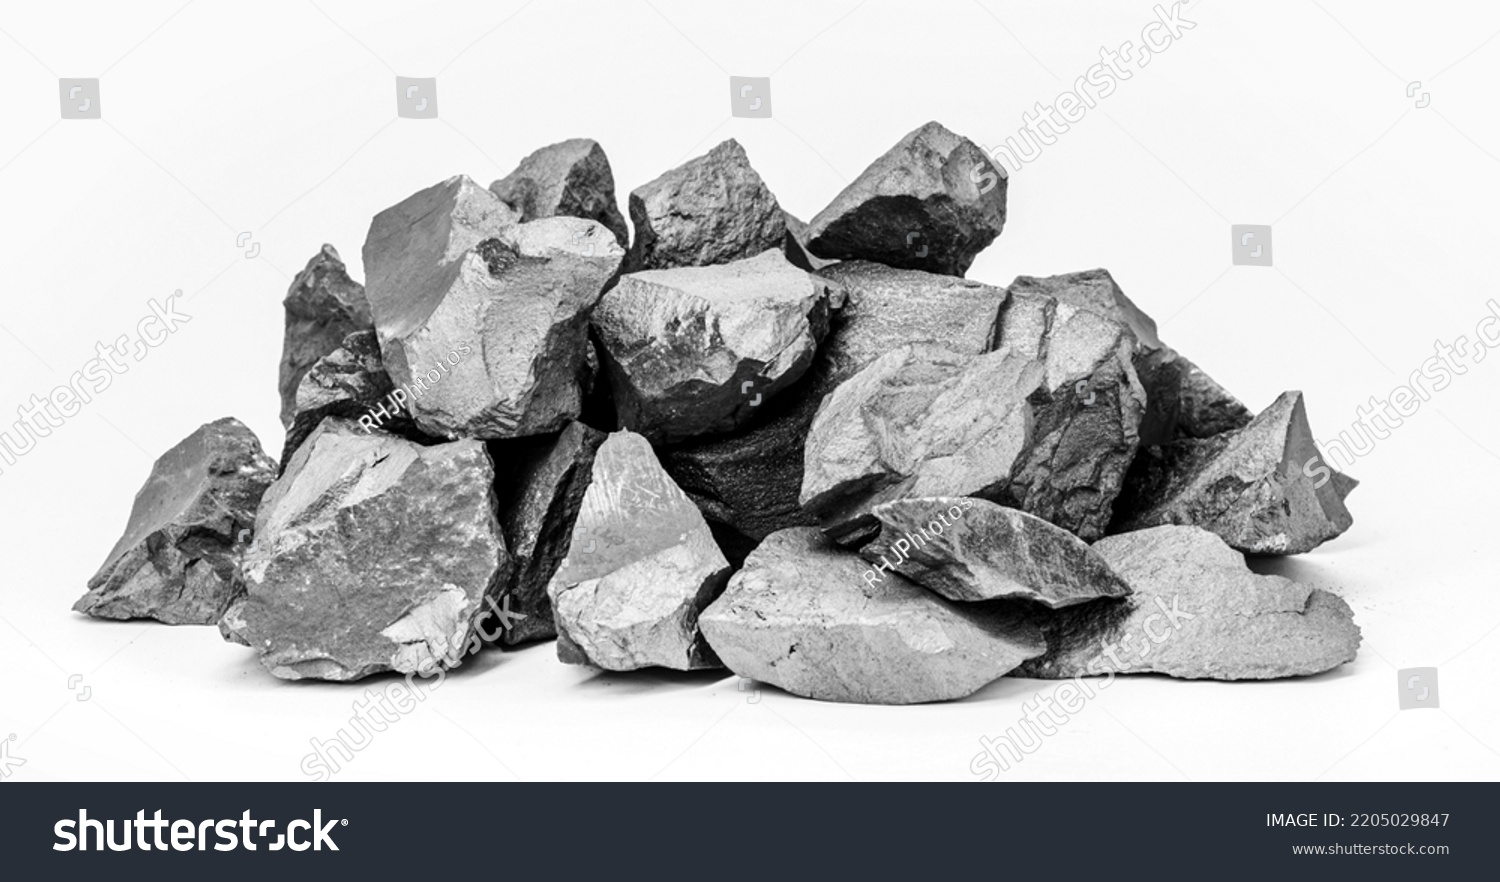 iron ore, rocks from which metallic iron can be obtained, iron extracted from magnetite, hematite or siderite. raw material for the metallurgical industry #2205029847